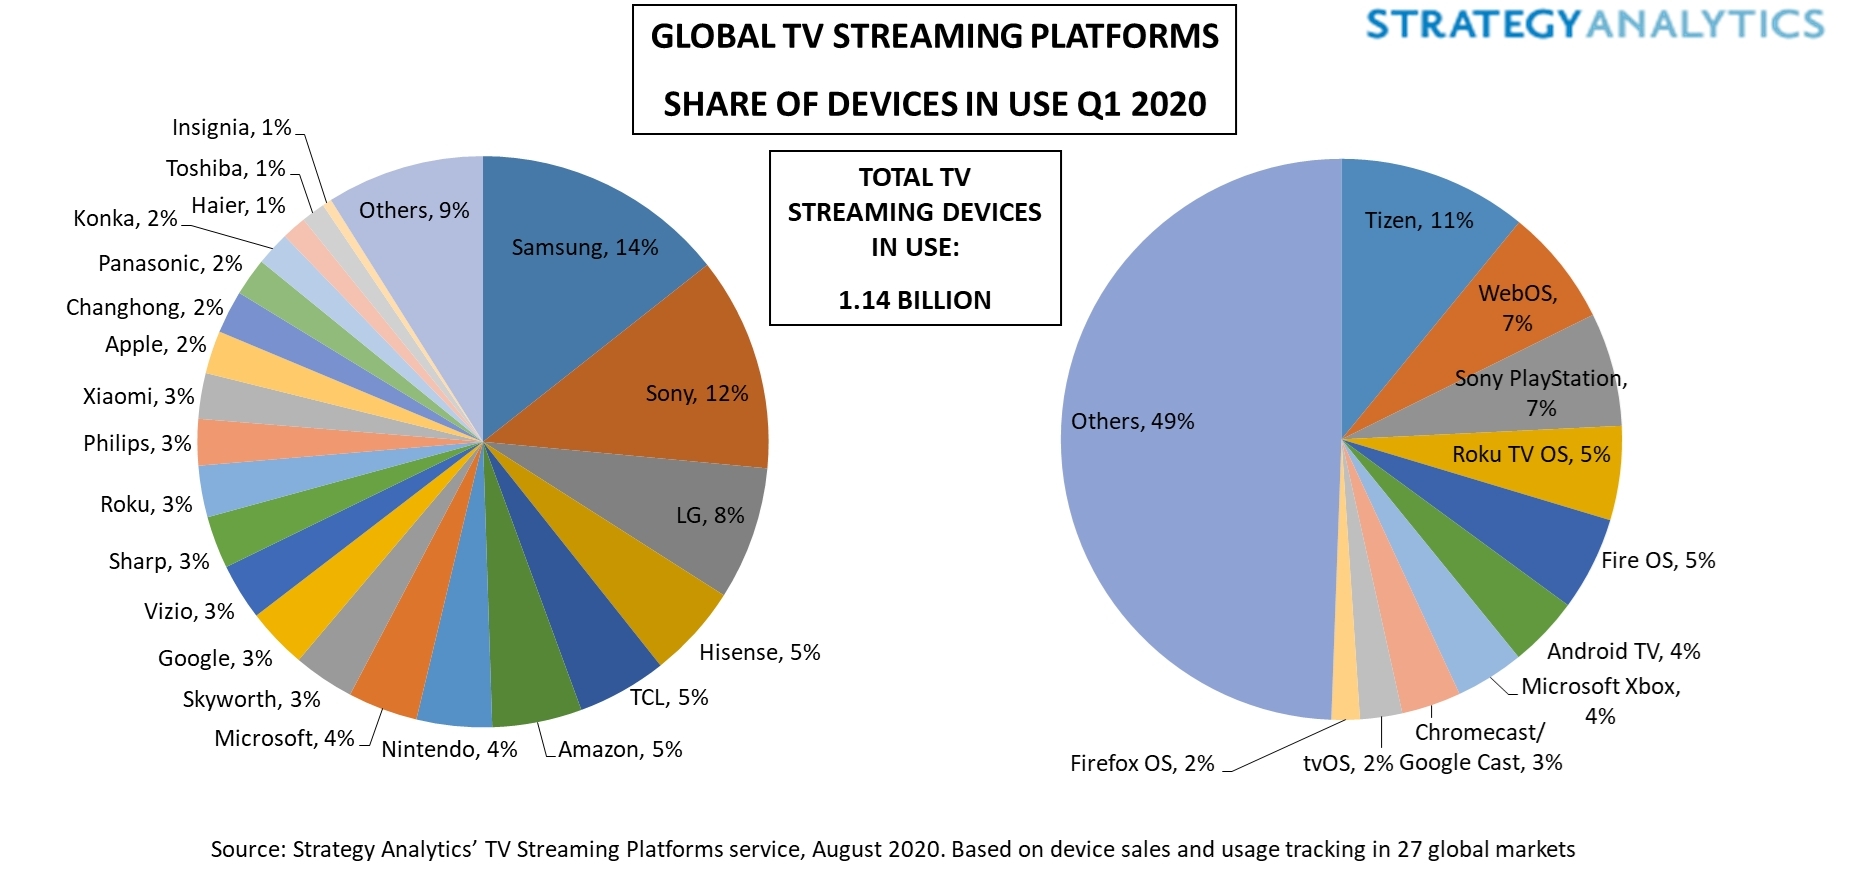 Marken7 Figure 1. Global TV Streaming Platforms Share of Devices in Use Q1 2020